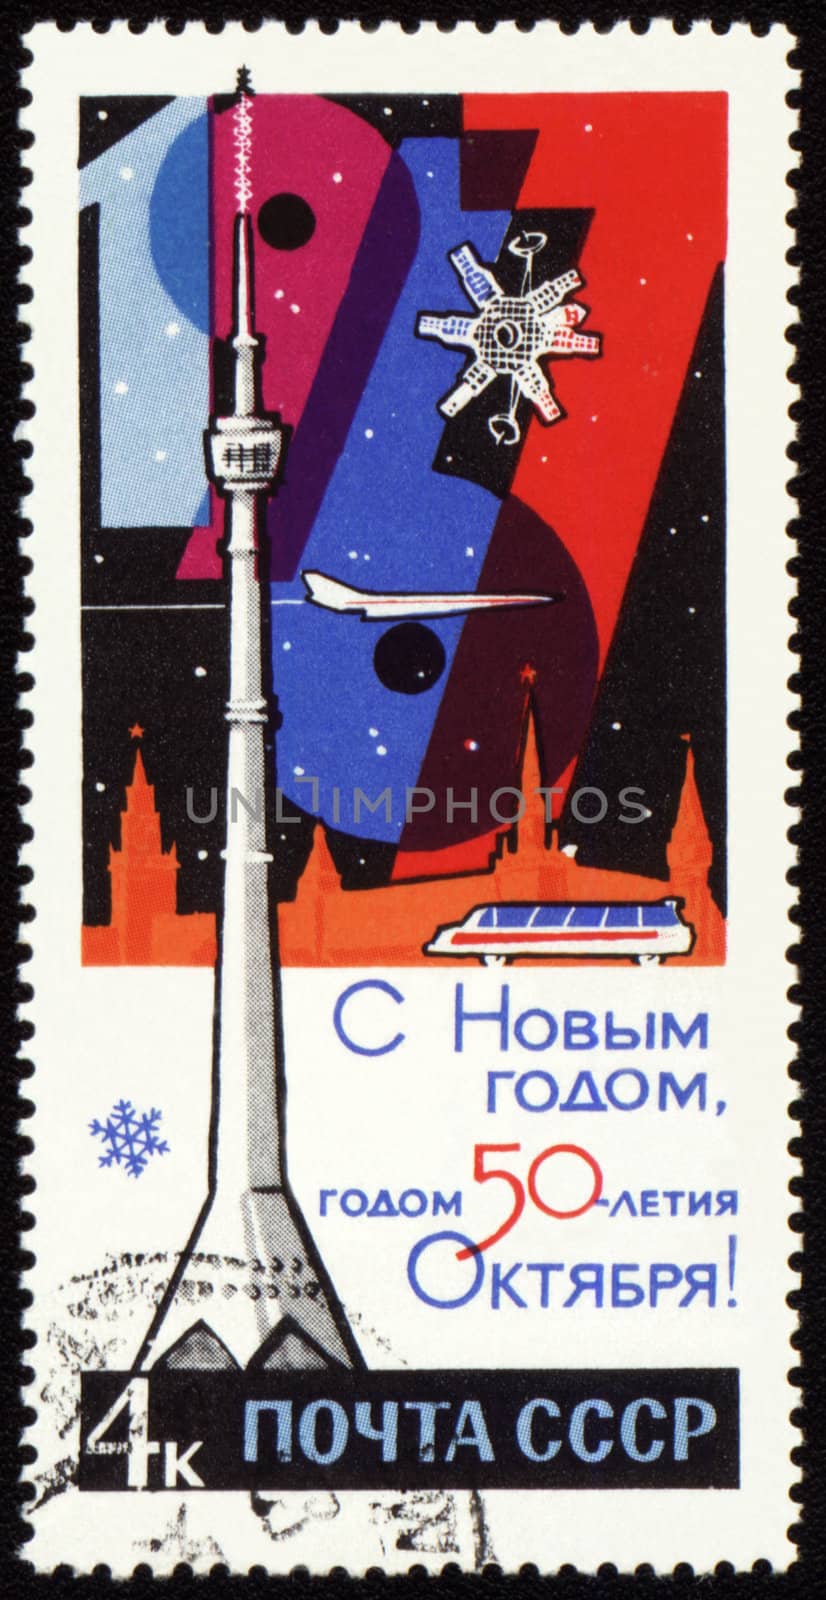 New Year in Moscow and Ostankino TV Tower on post stamp by wander